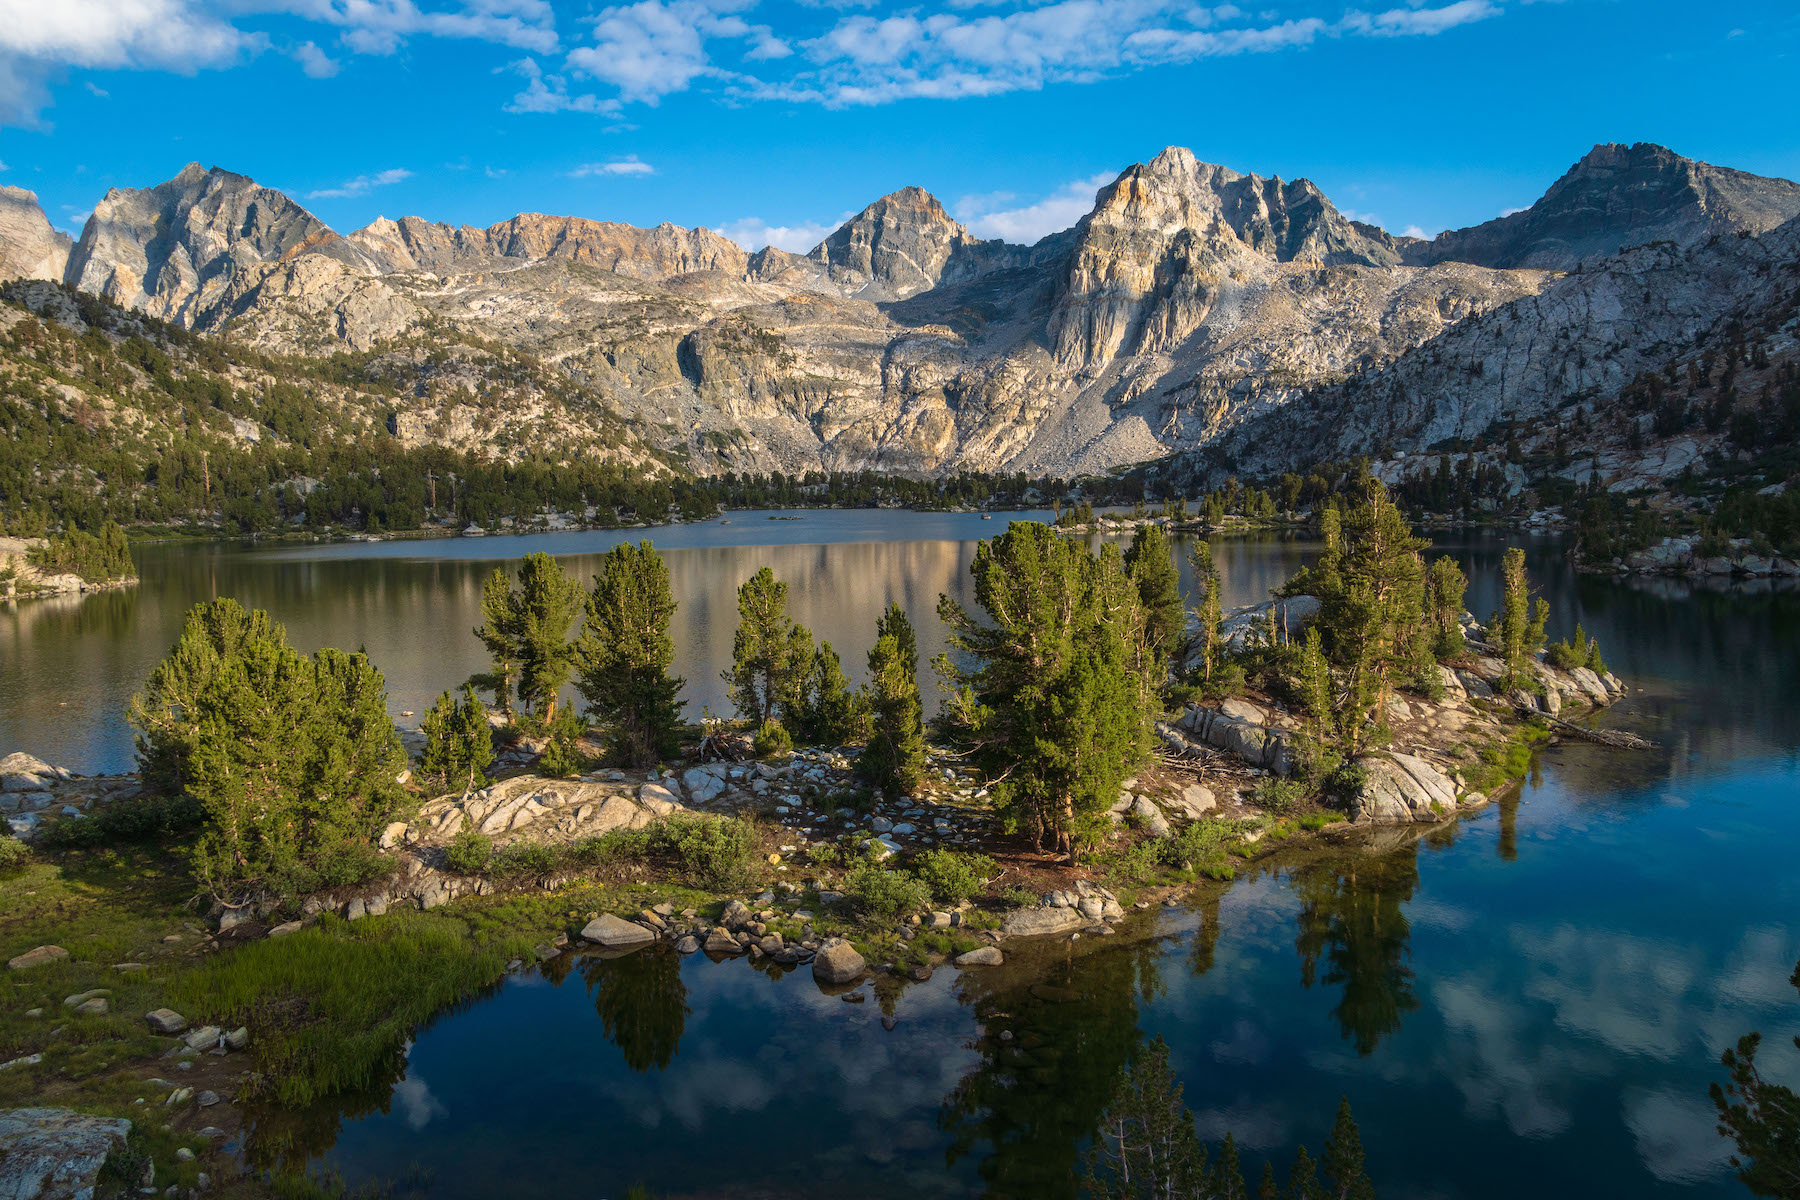 Middle Rae Lakes in Kings Canyon National Park. Photo by Brock Dallman